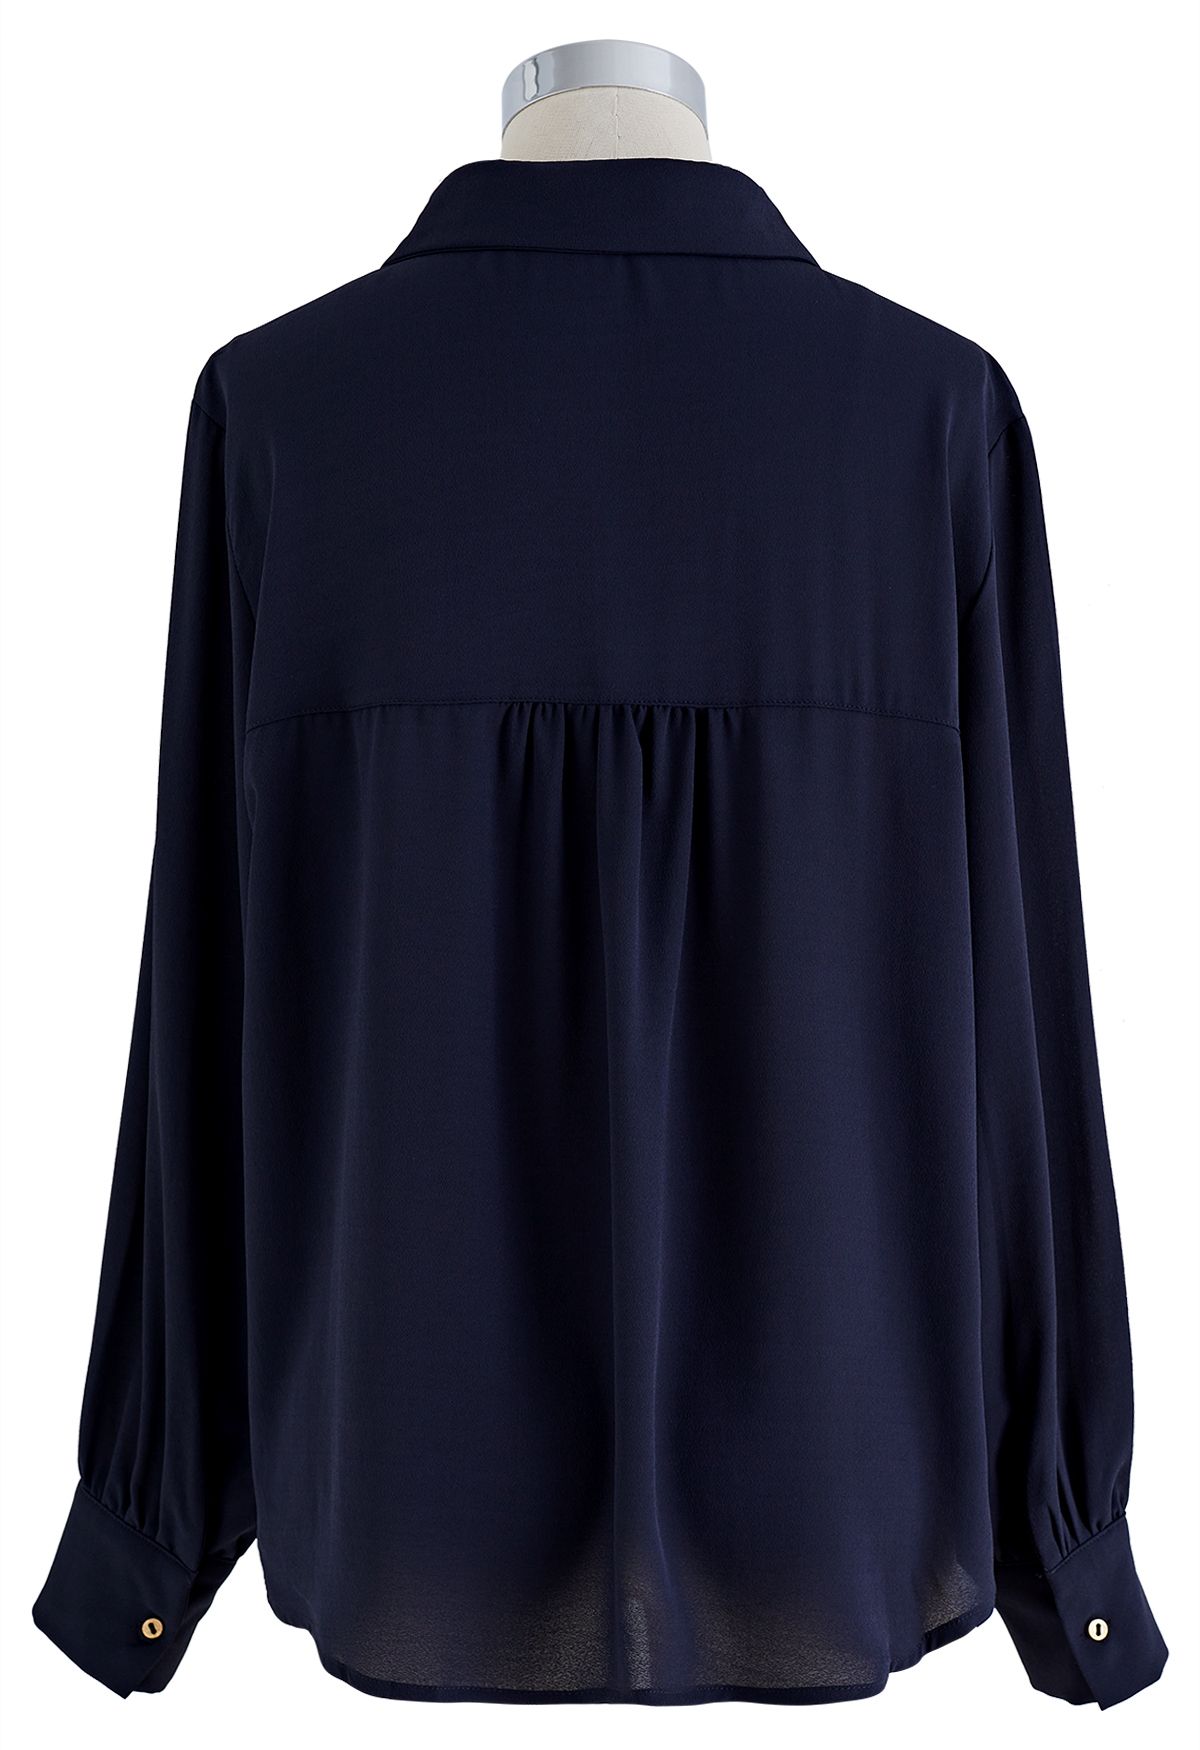 Long Sleeve Collared Shirt in Navy